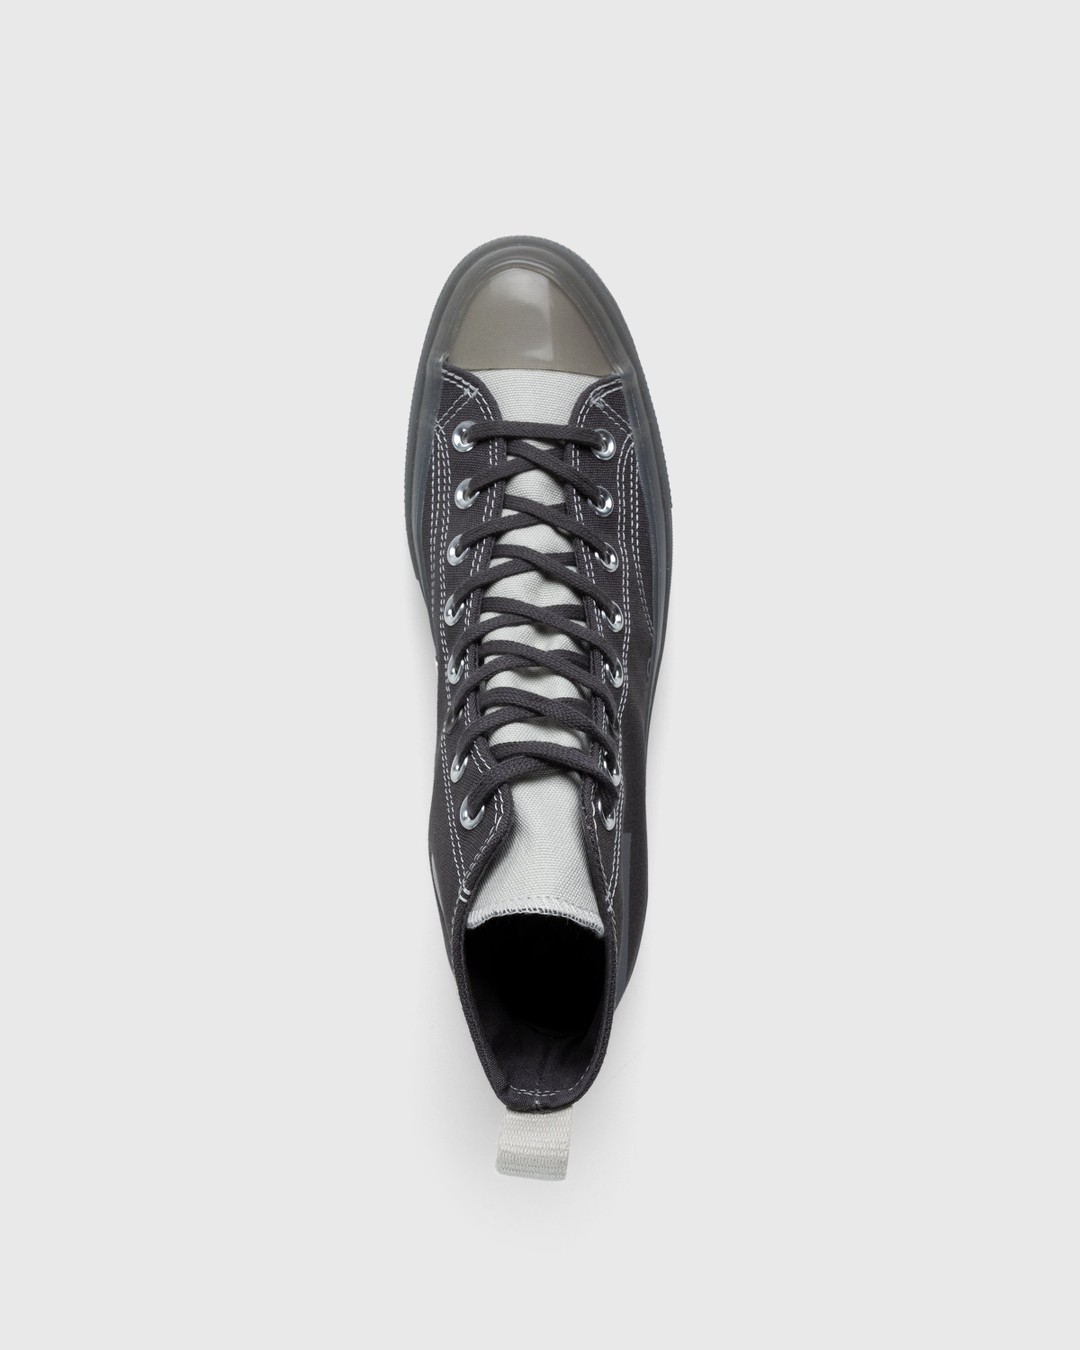 Converse x A-Cold-Wall* – Chuck 70 Hi Pavement/Silver Birch - High Top Sneakers - Black - Image 4